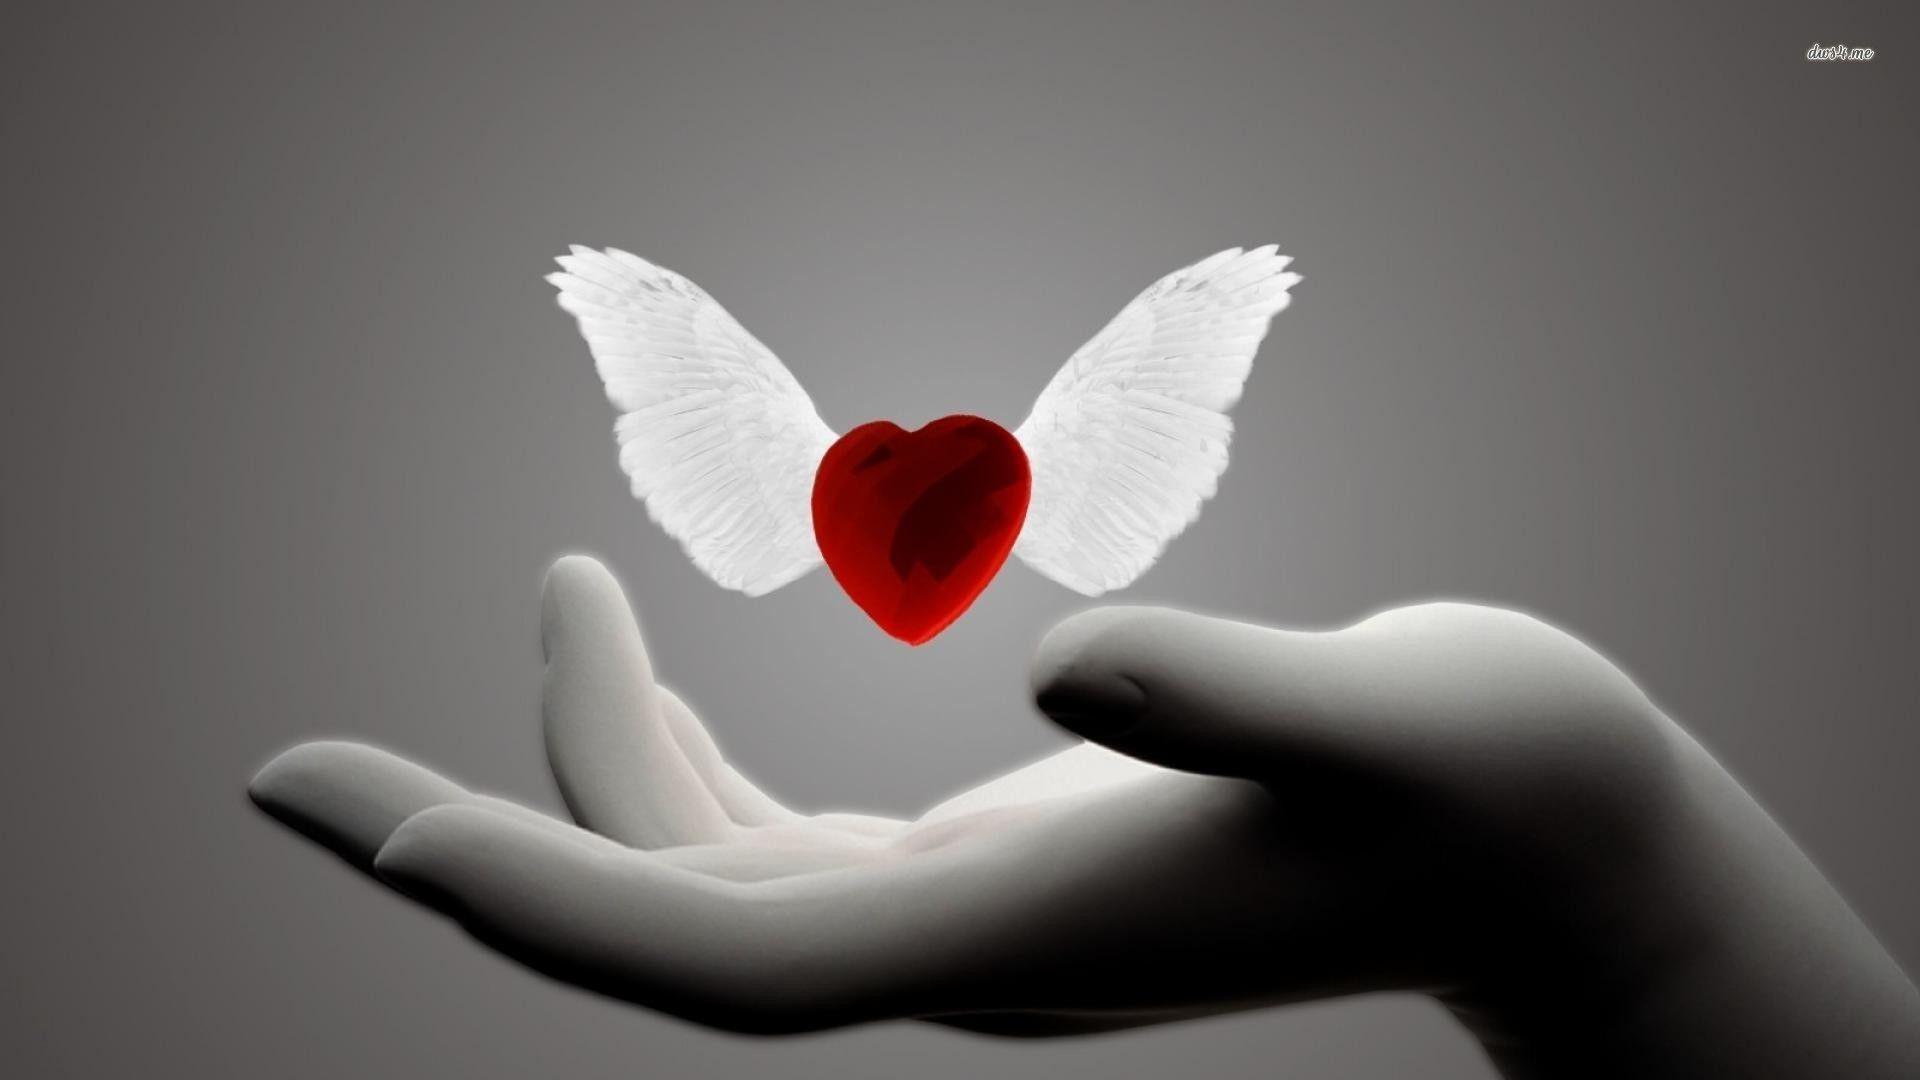 Heart With Wings Facebook Cover Image. Angels Hearts